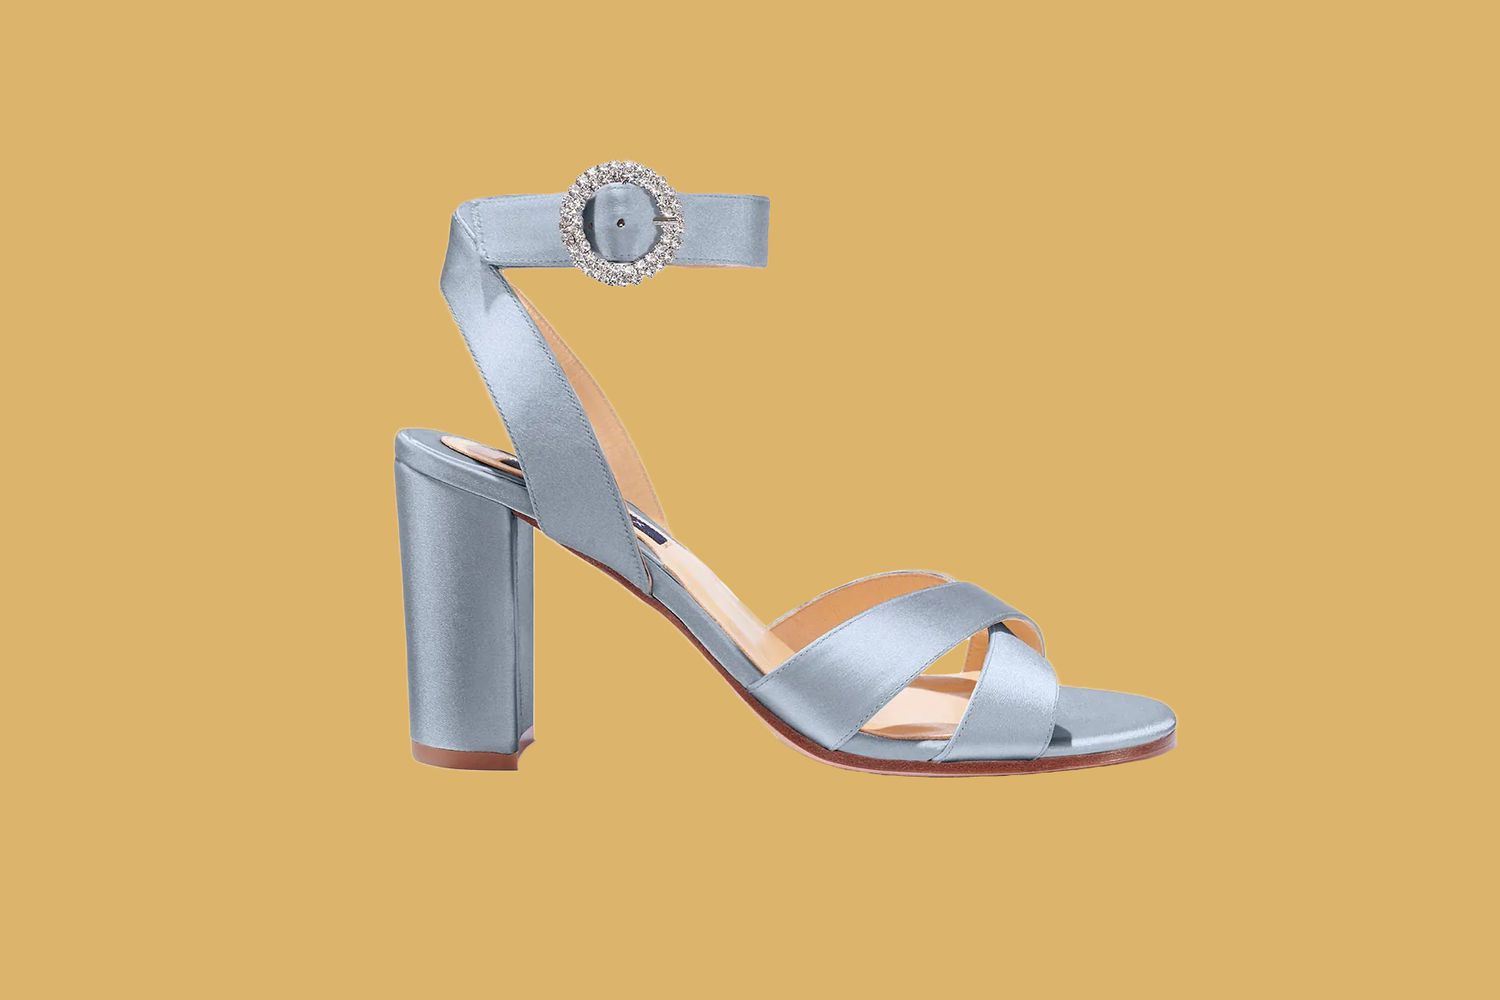 The 12 Best Wedding Shoes to Wear to an Outdoor Wedding With Grass ...